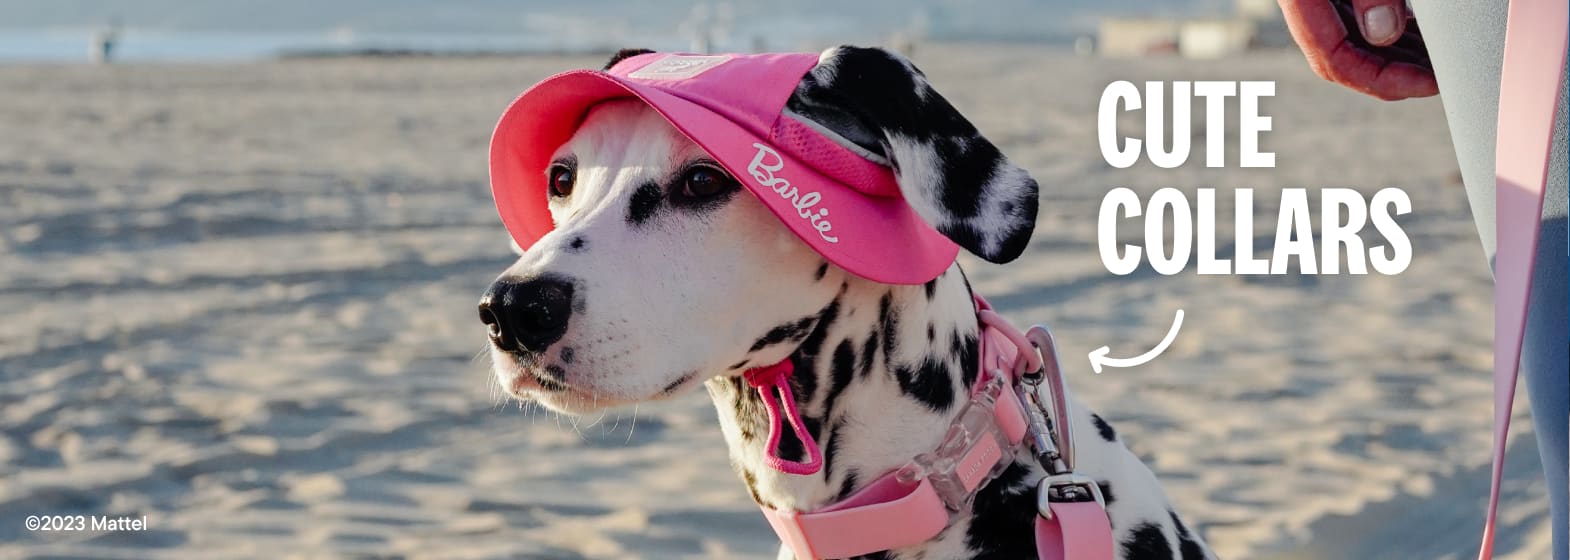 Barbie Landing Page - Image gallery preview - Shop Barbie collars, leashes and harnesses